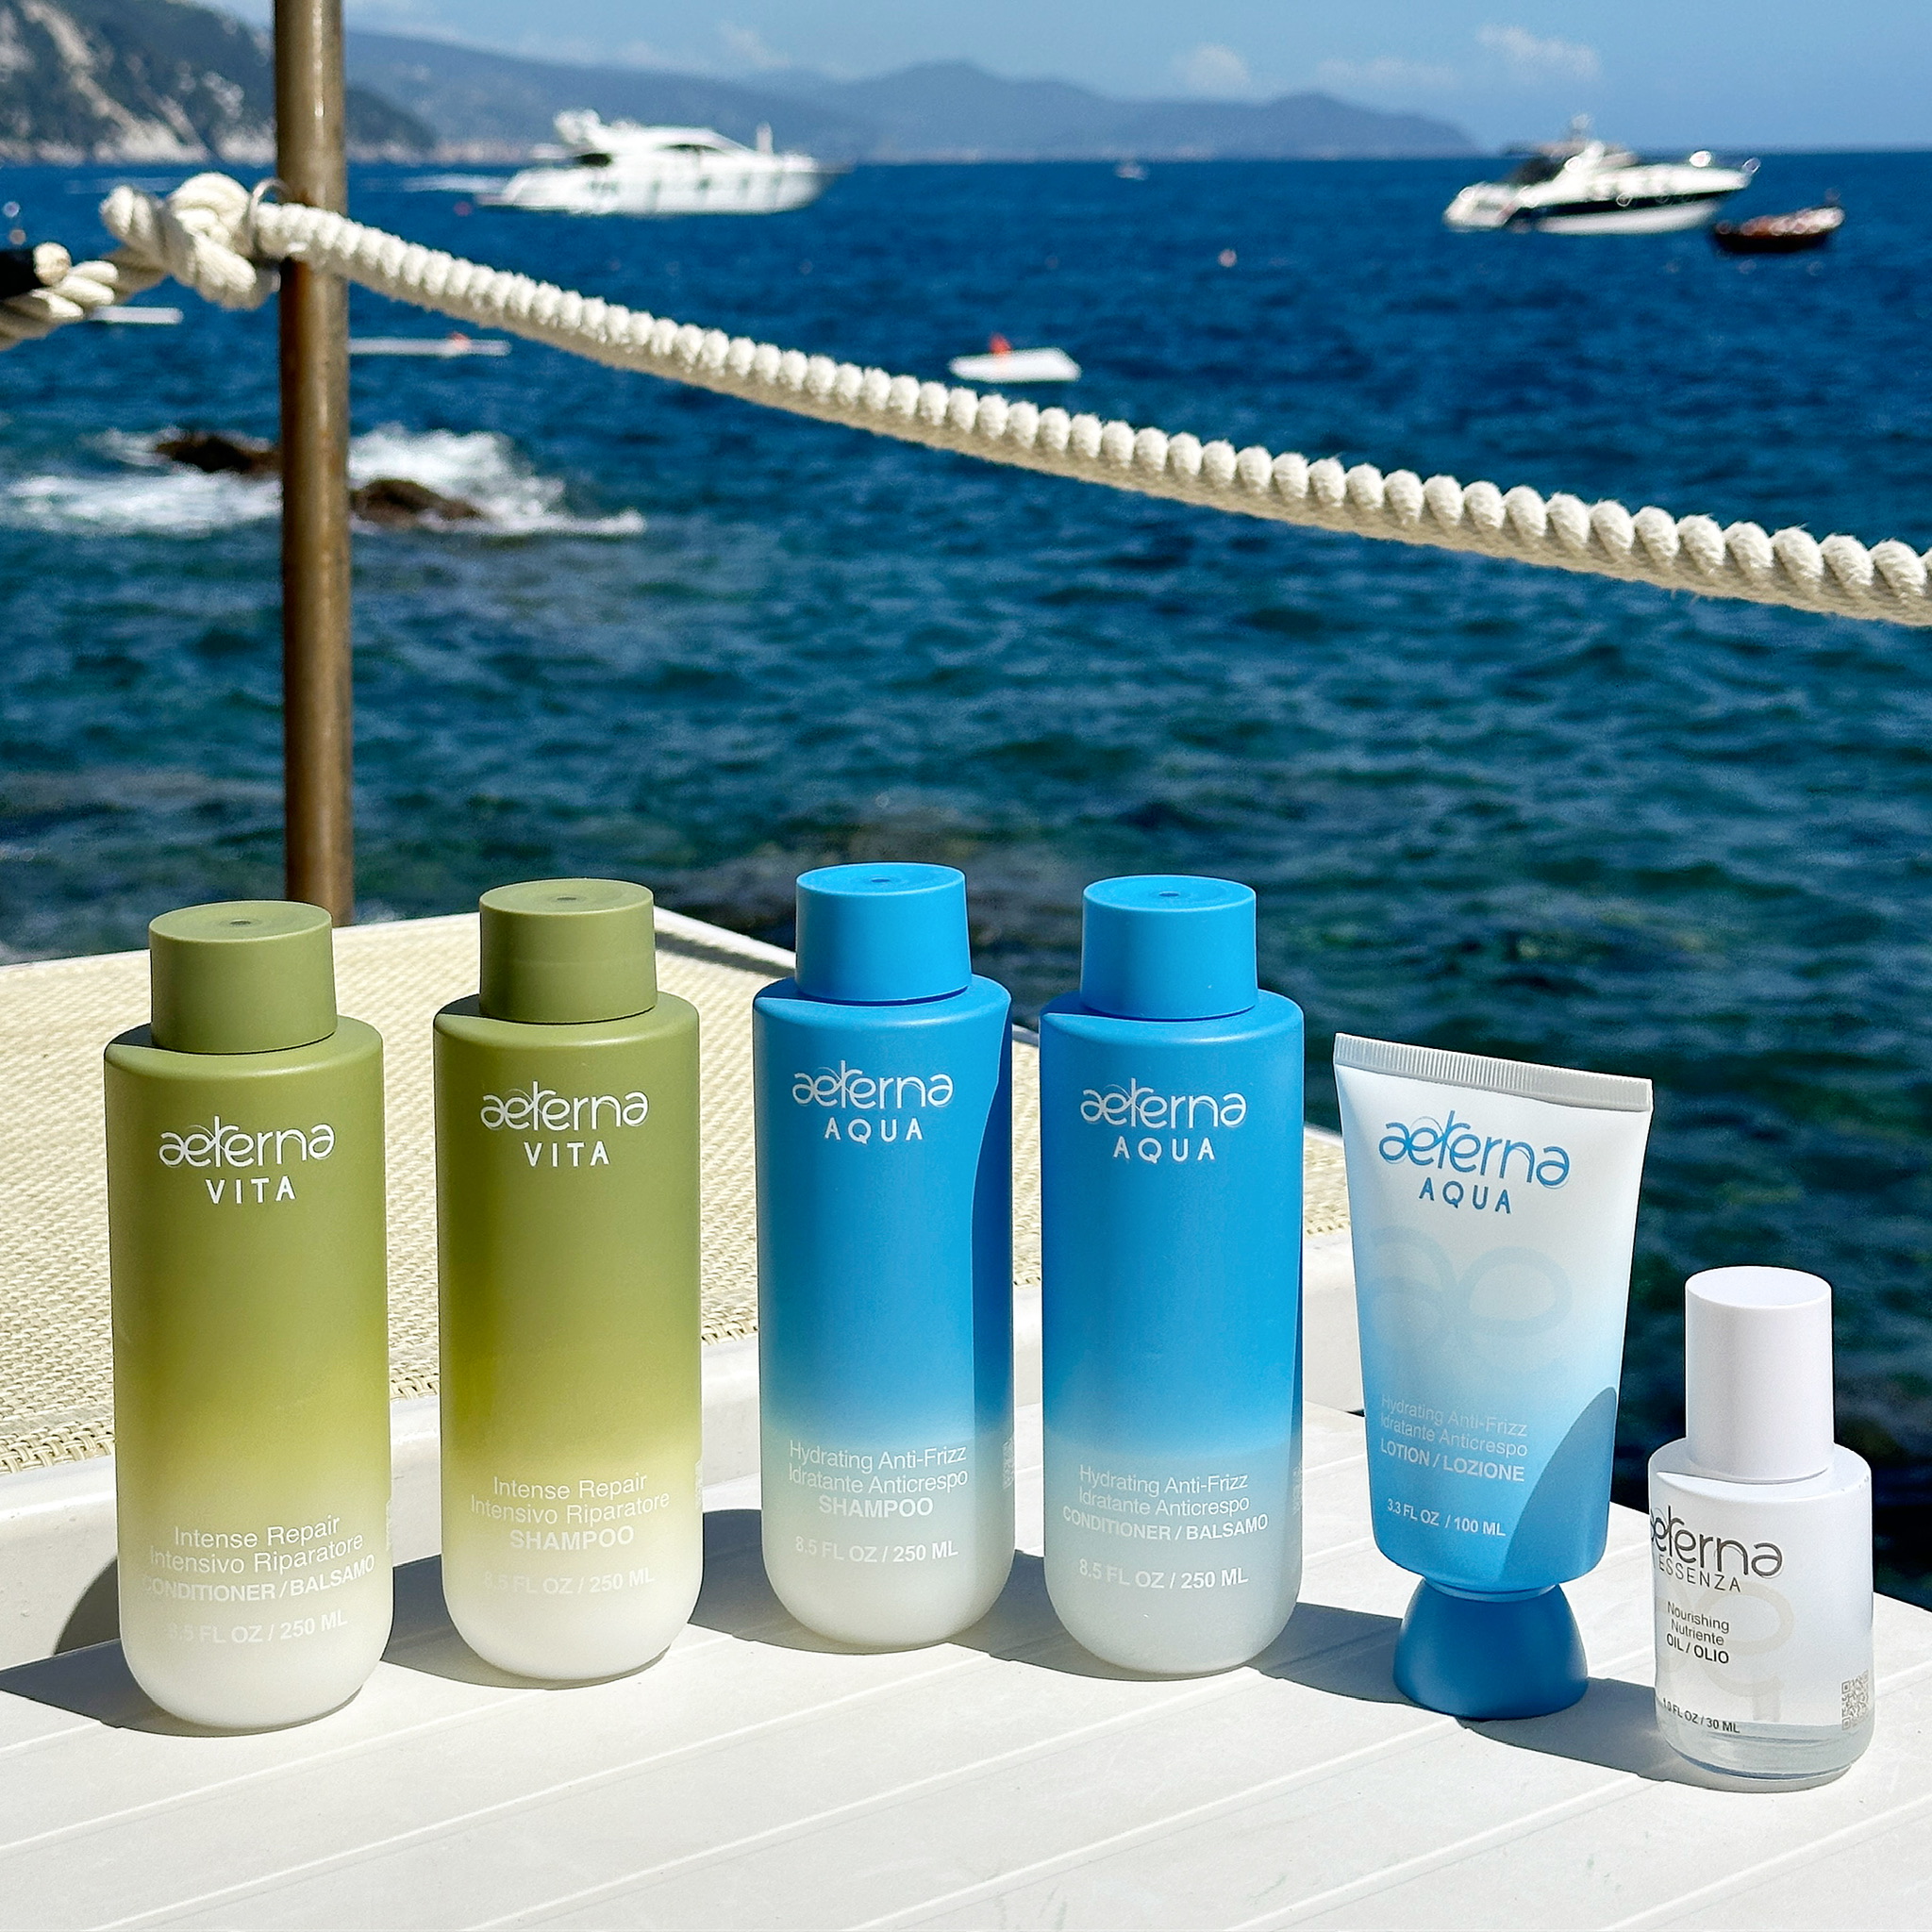 Aeterna's haircare products in front of the sea.